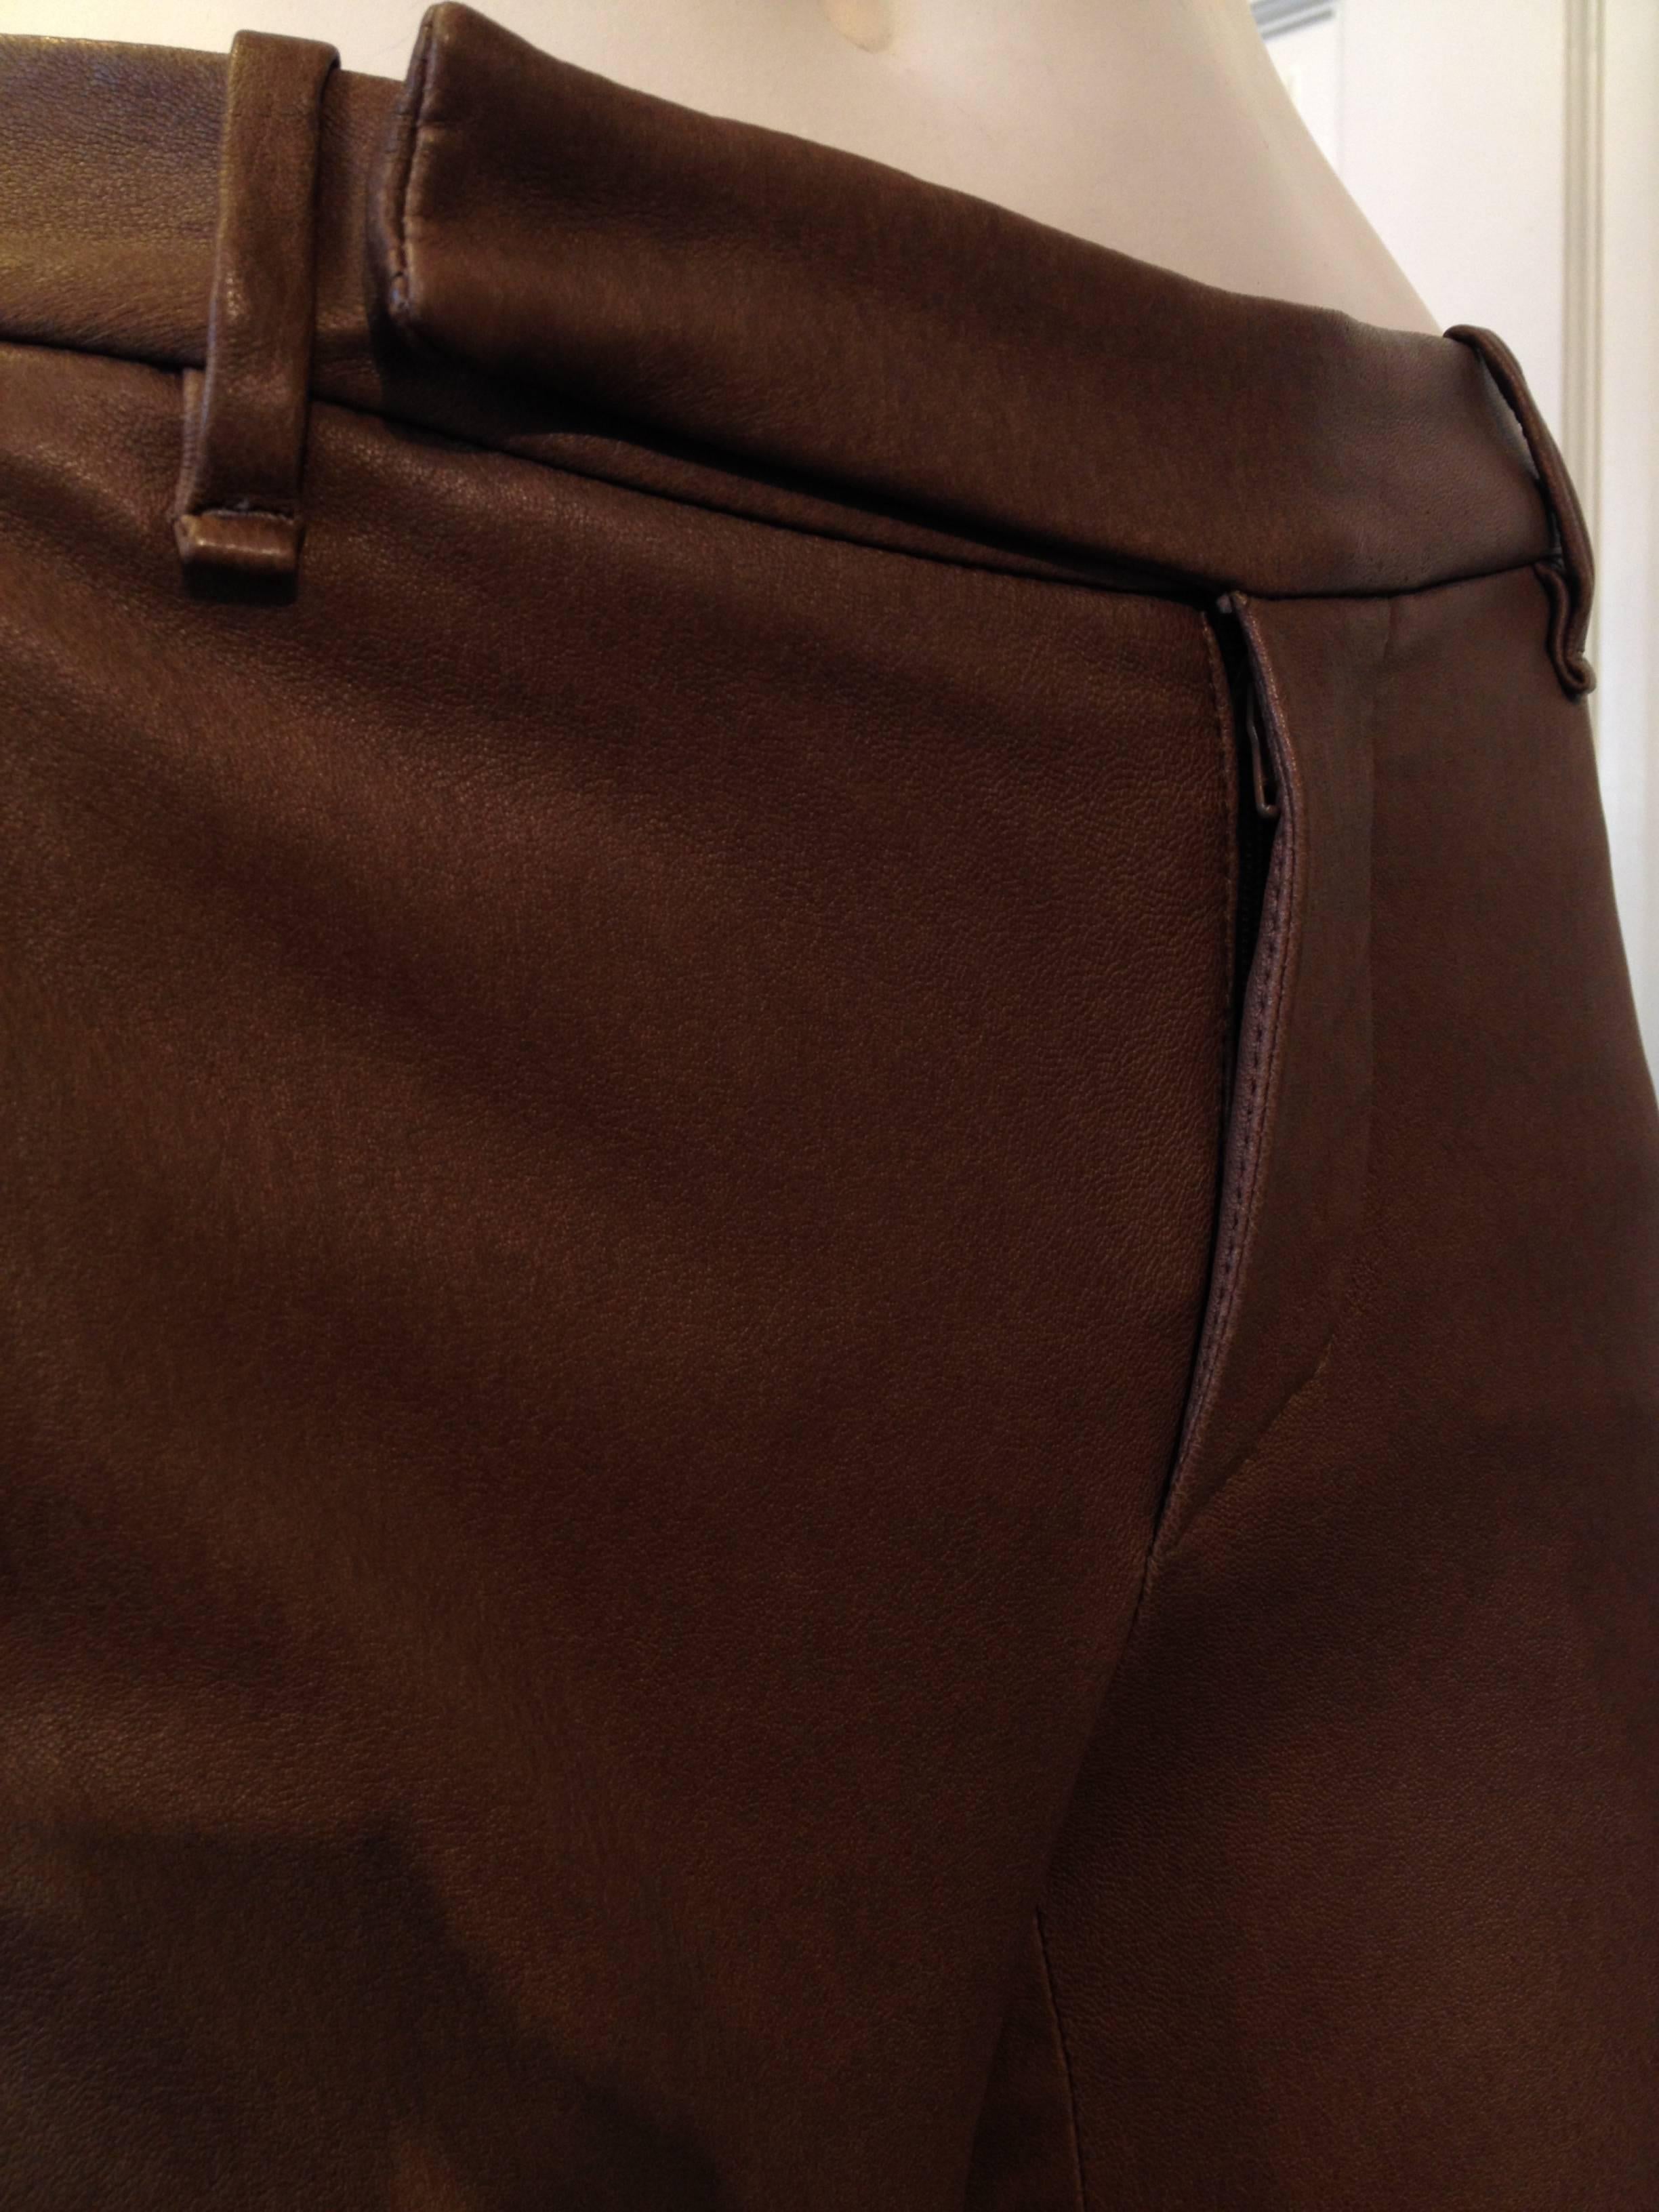 Women's Brunello Cucinelli Toffee Brown Leather Pant Size 38 (2)